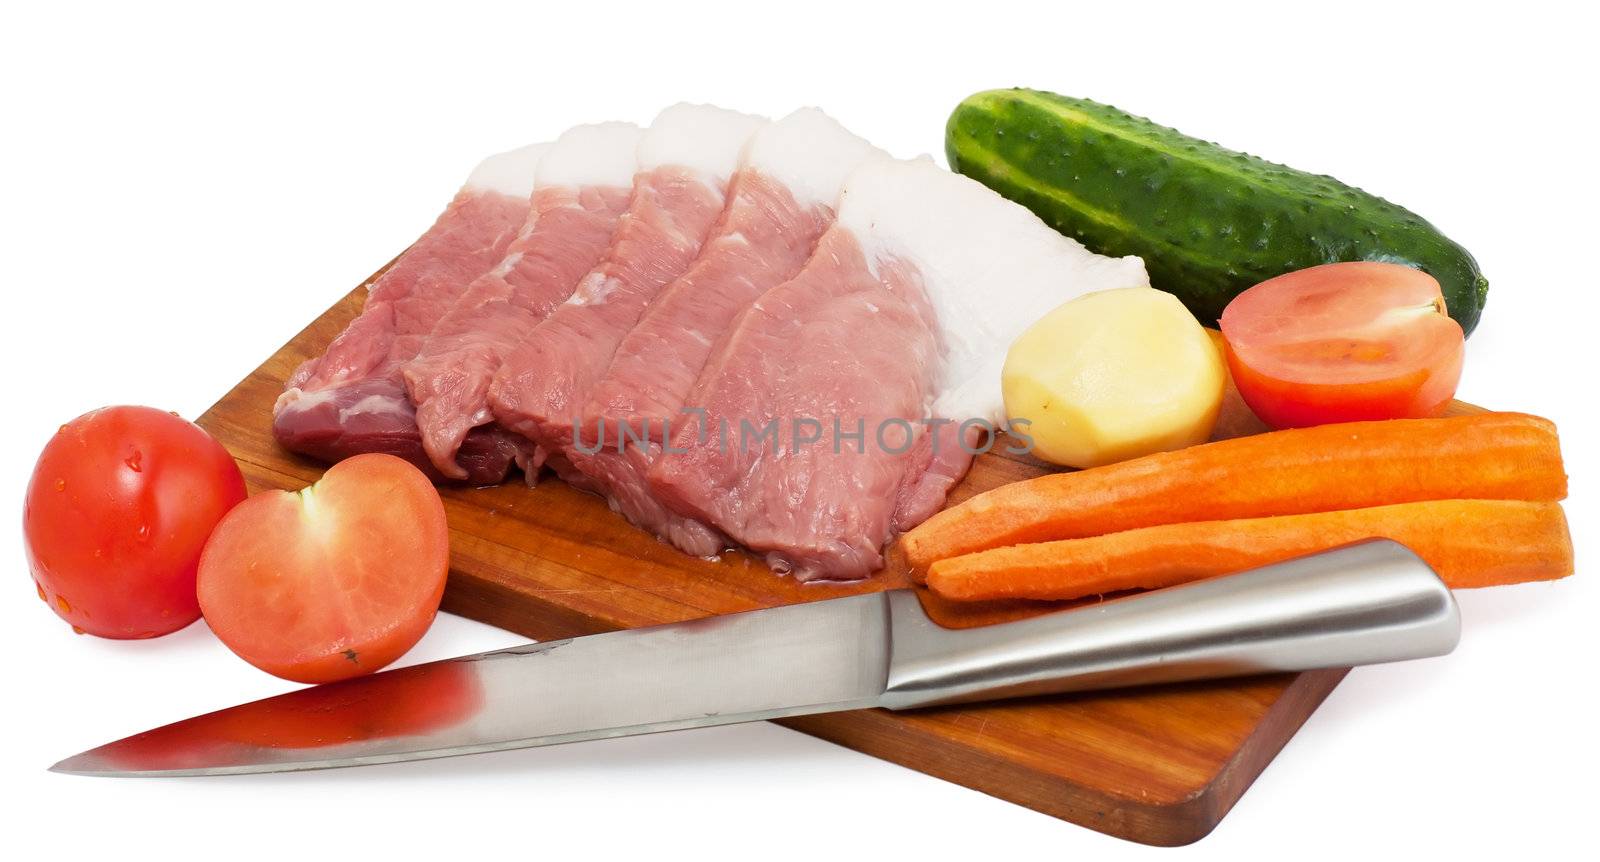 Unprepared cutted meat and vegetables.